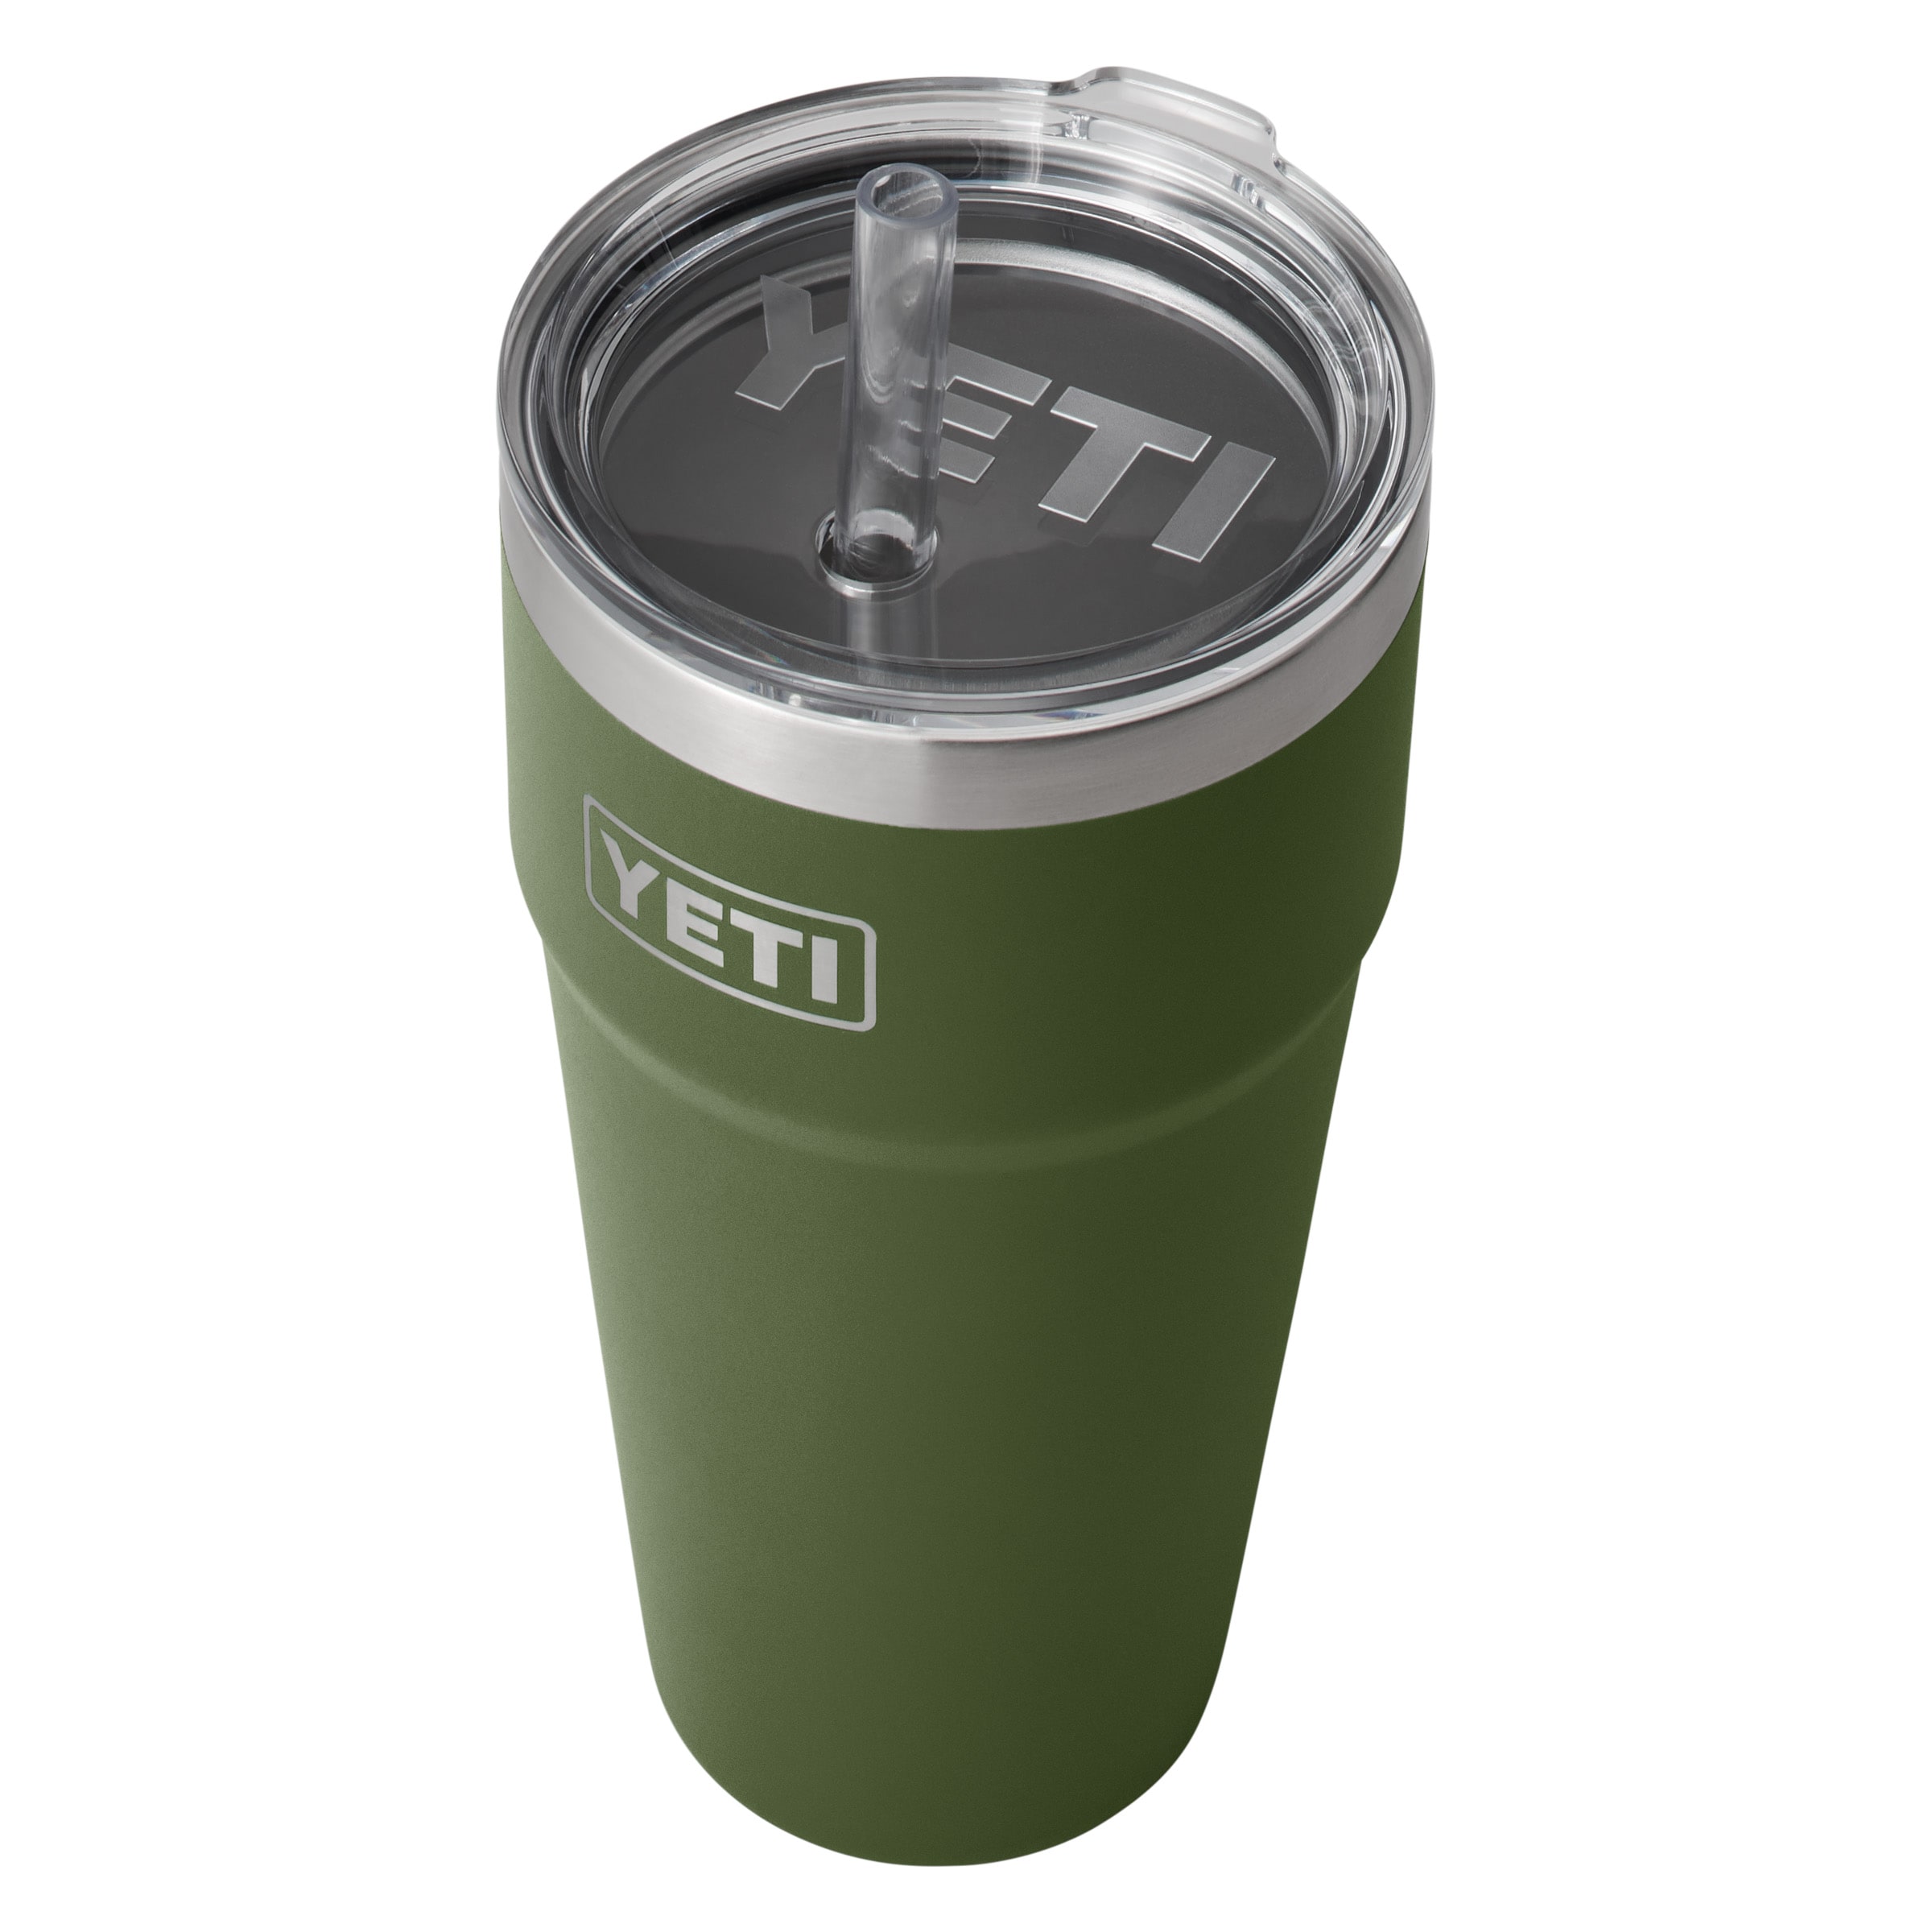 YETI Rambler 26-fl oz Stainless Steel Cup with Straw Lid at